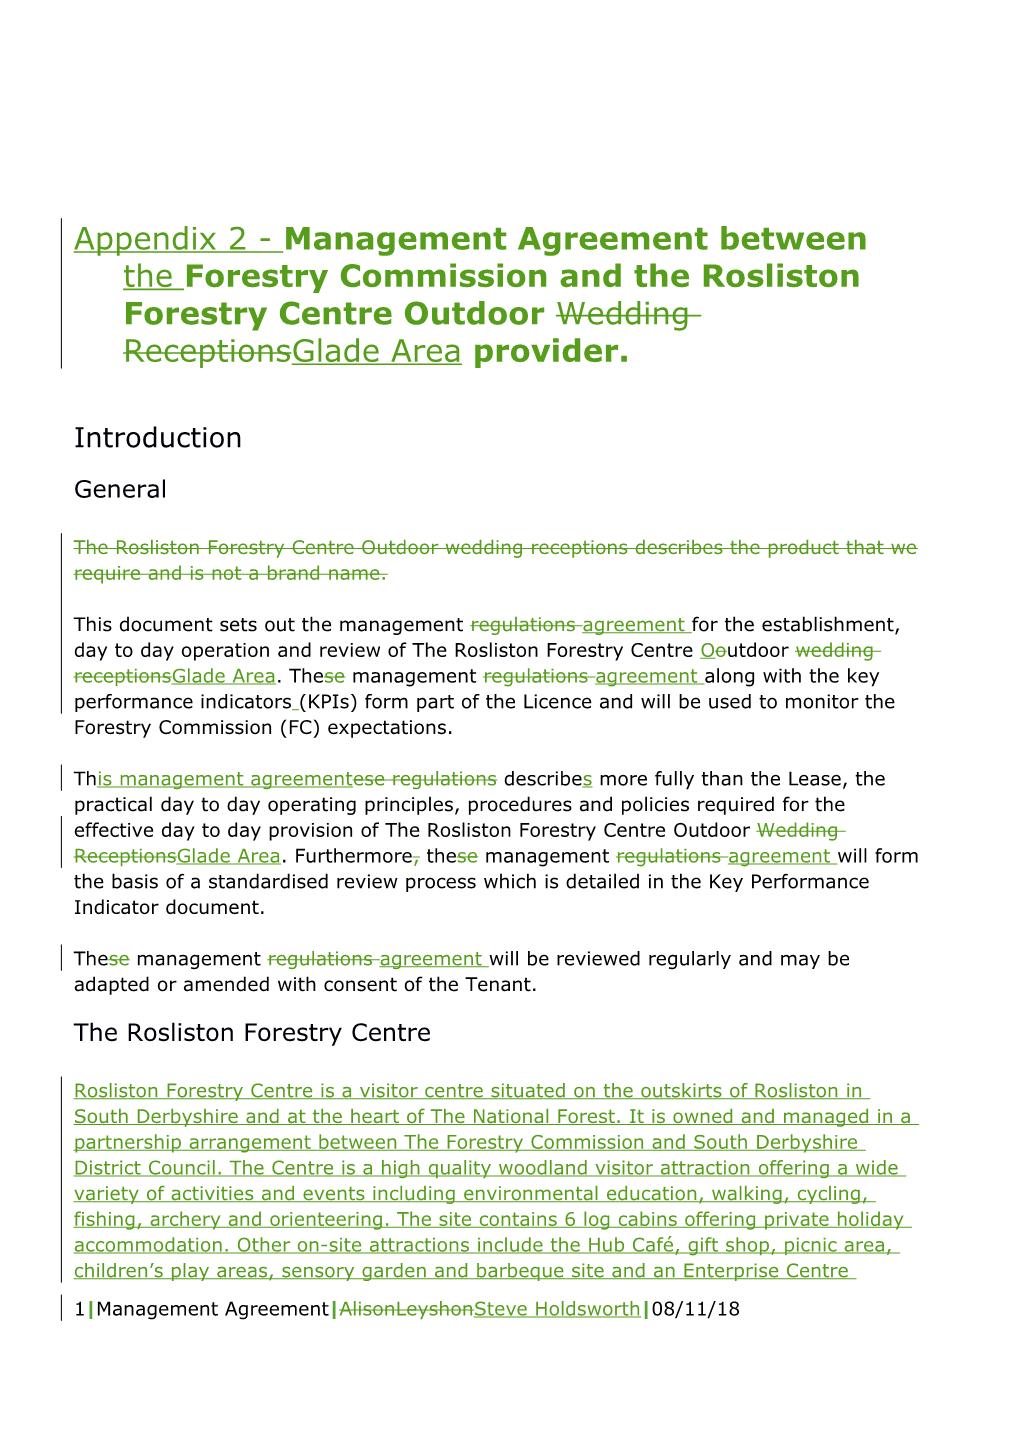 Appendix 2 - Management Agreement Between the Forestry Commission and the Rosliston Forestry